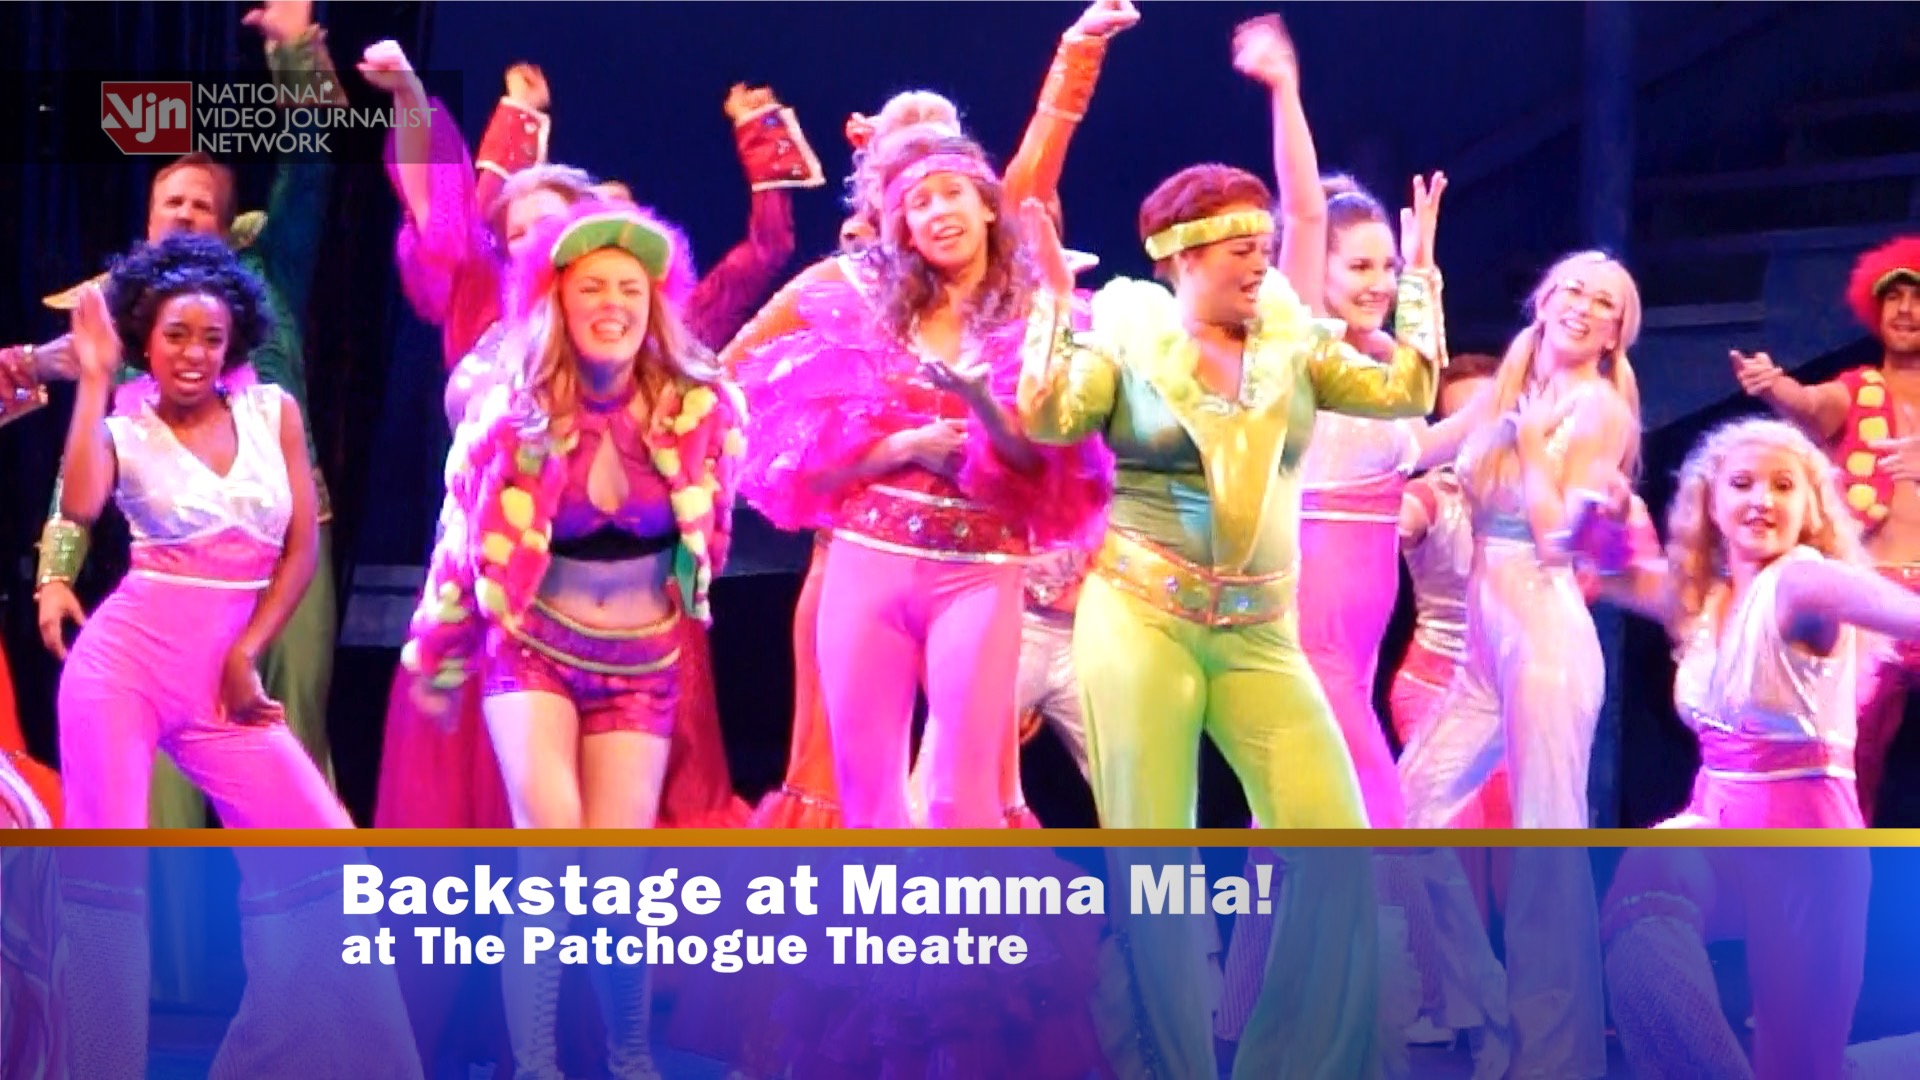 Meet The Cast Mamma Mia! at Patchogue Theatre